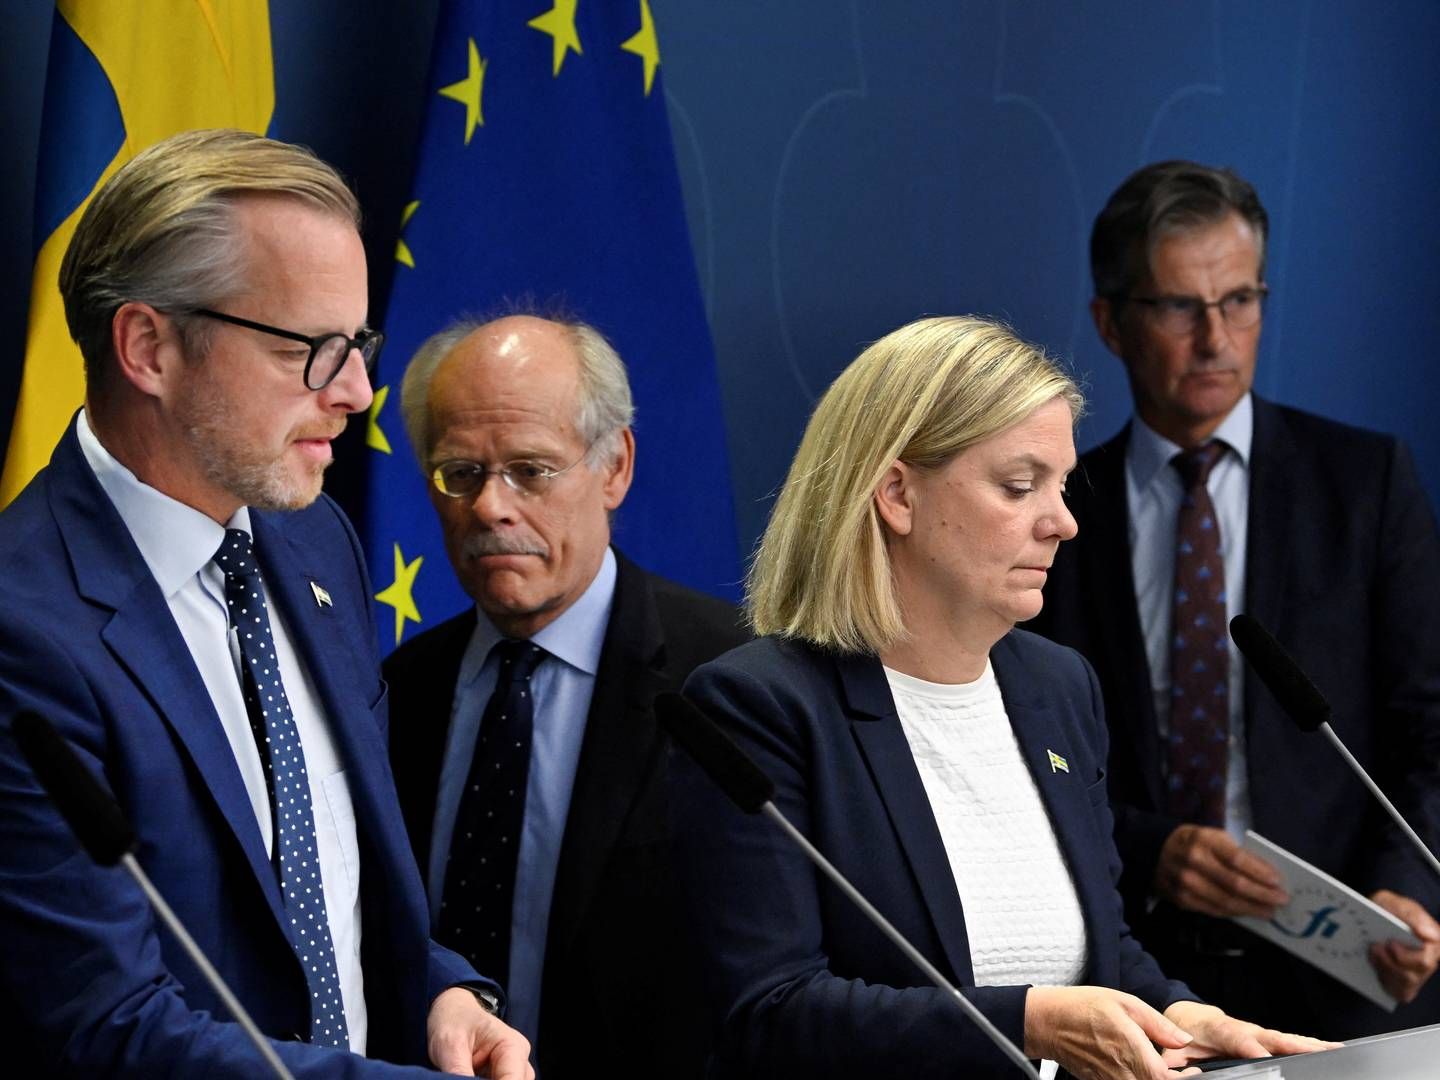 Sweden's Minister of Finance, Mikael Damberg, and Prime Minister Magdalena Andersson present proposal about guarantees for power companies at a press meeting on Saturday. | Photo: TT NEWS AGENCY/VIA REUTERS / X02350